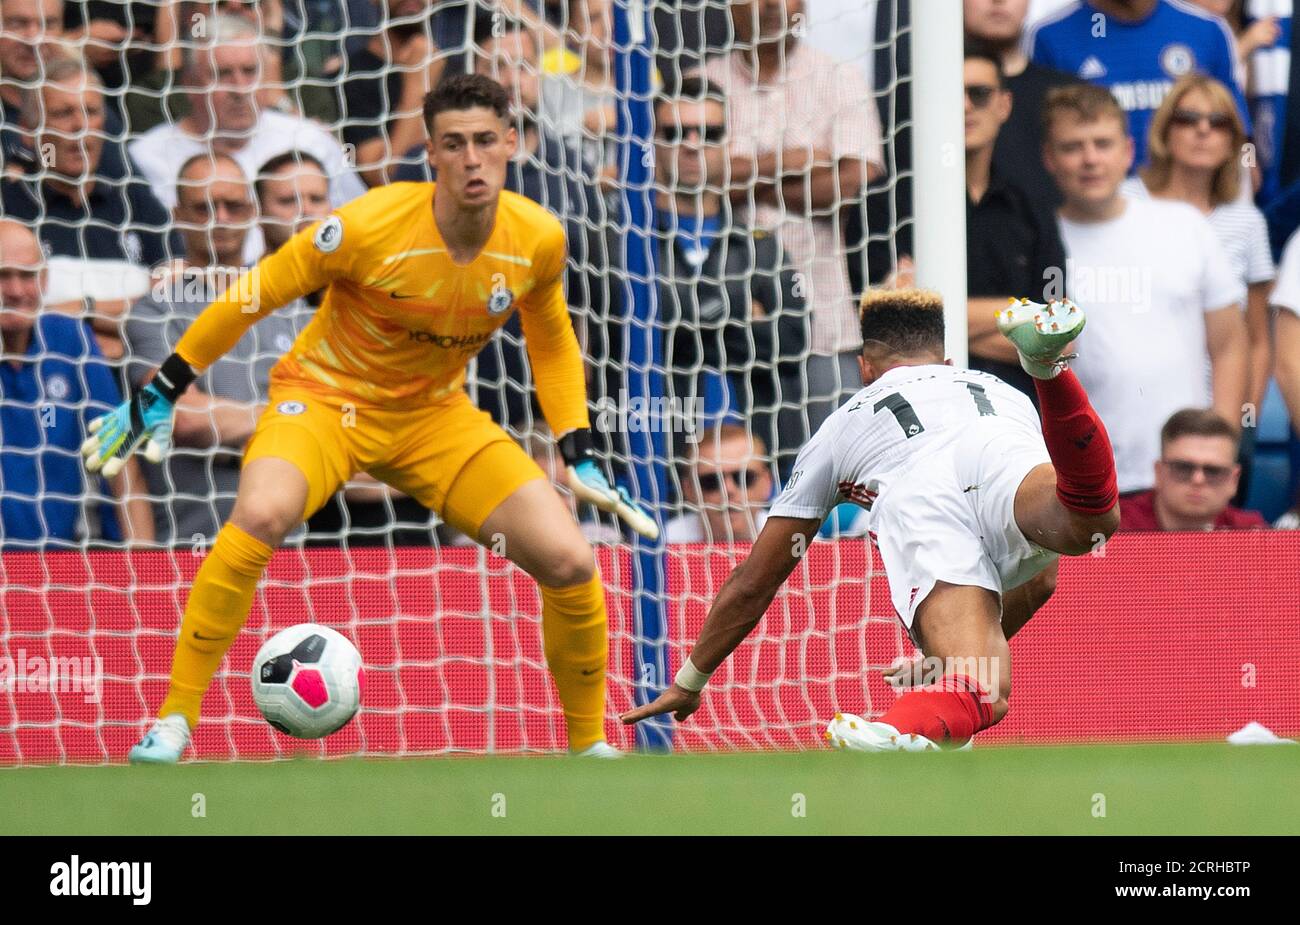 Chelsea's Kepa watches a close header from Sheffield United's Callum Robinson go just past the post.  PHOTO CREDIT : © MARK PAIN / ALAMY STOCK PHOTO Stock Photo